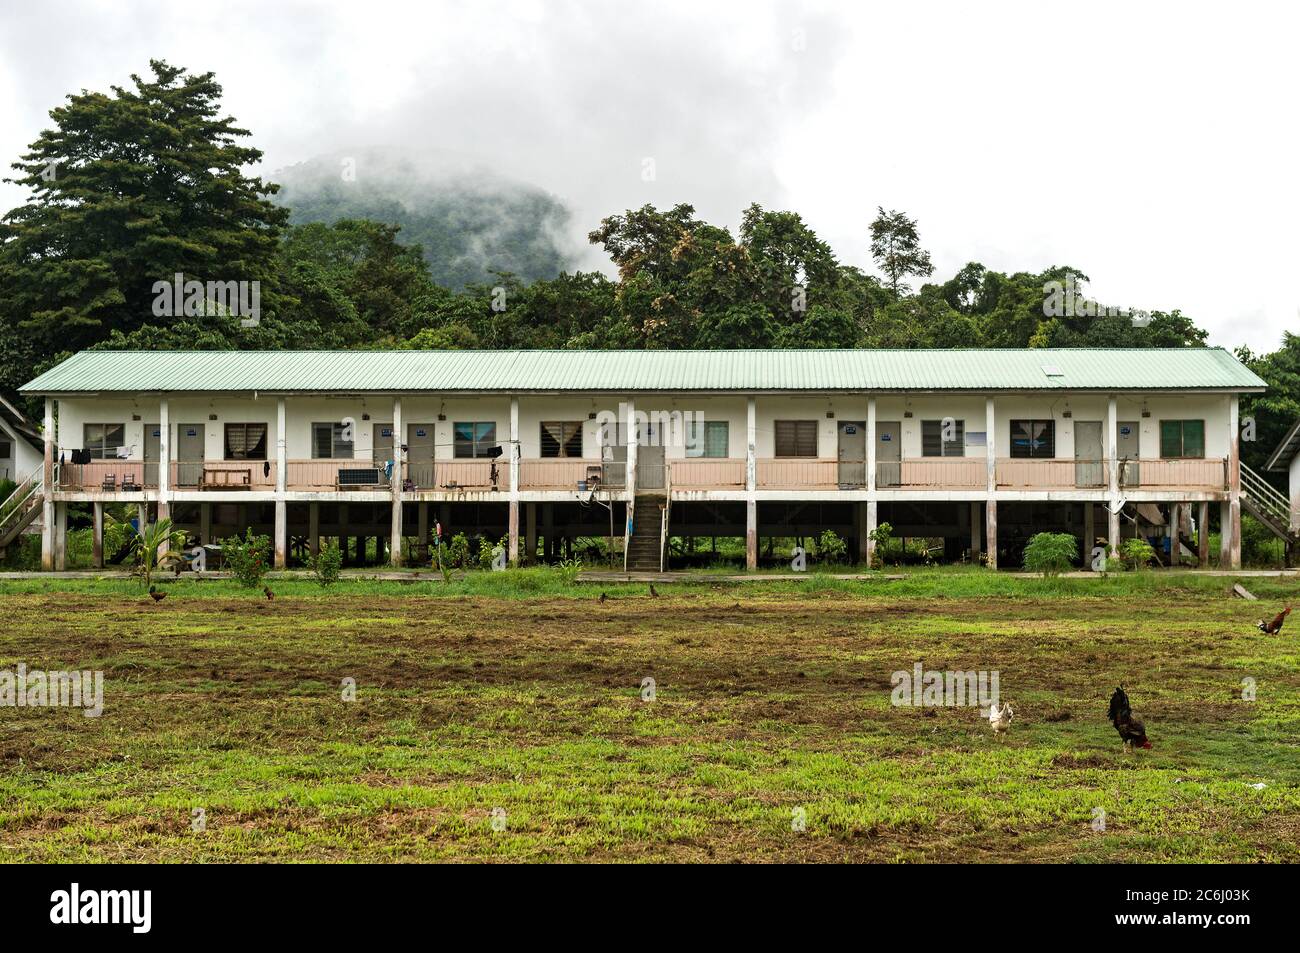 A government sponsored longhouse of a resettlement project for the indigenous Penan people in a Penan Village near the Melinau River, Sarawak, Borneo, Stock Photo